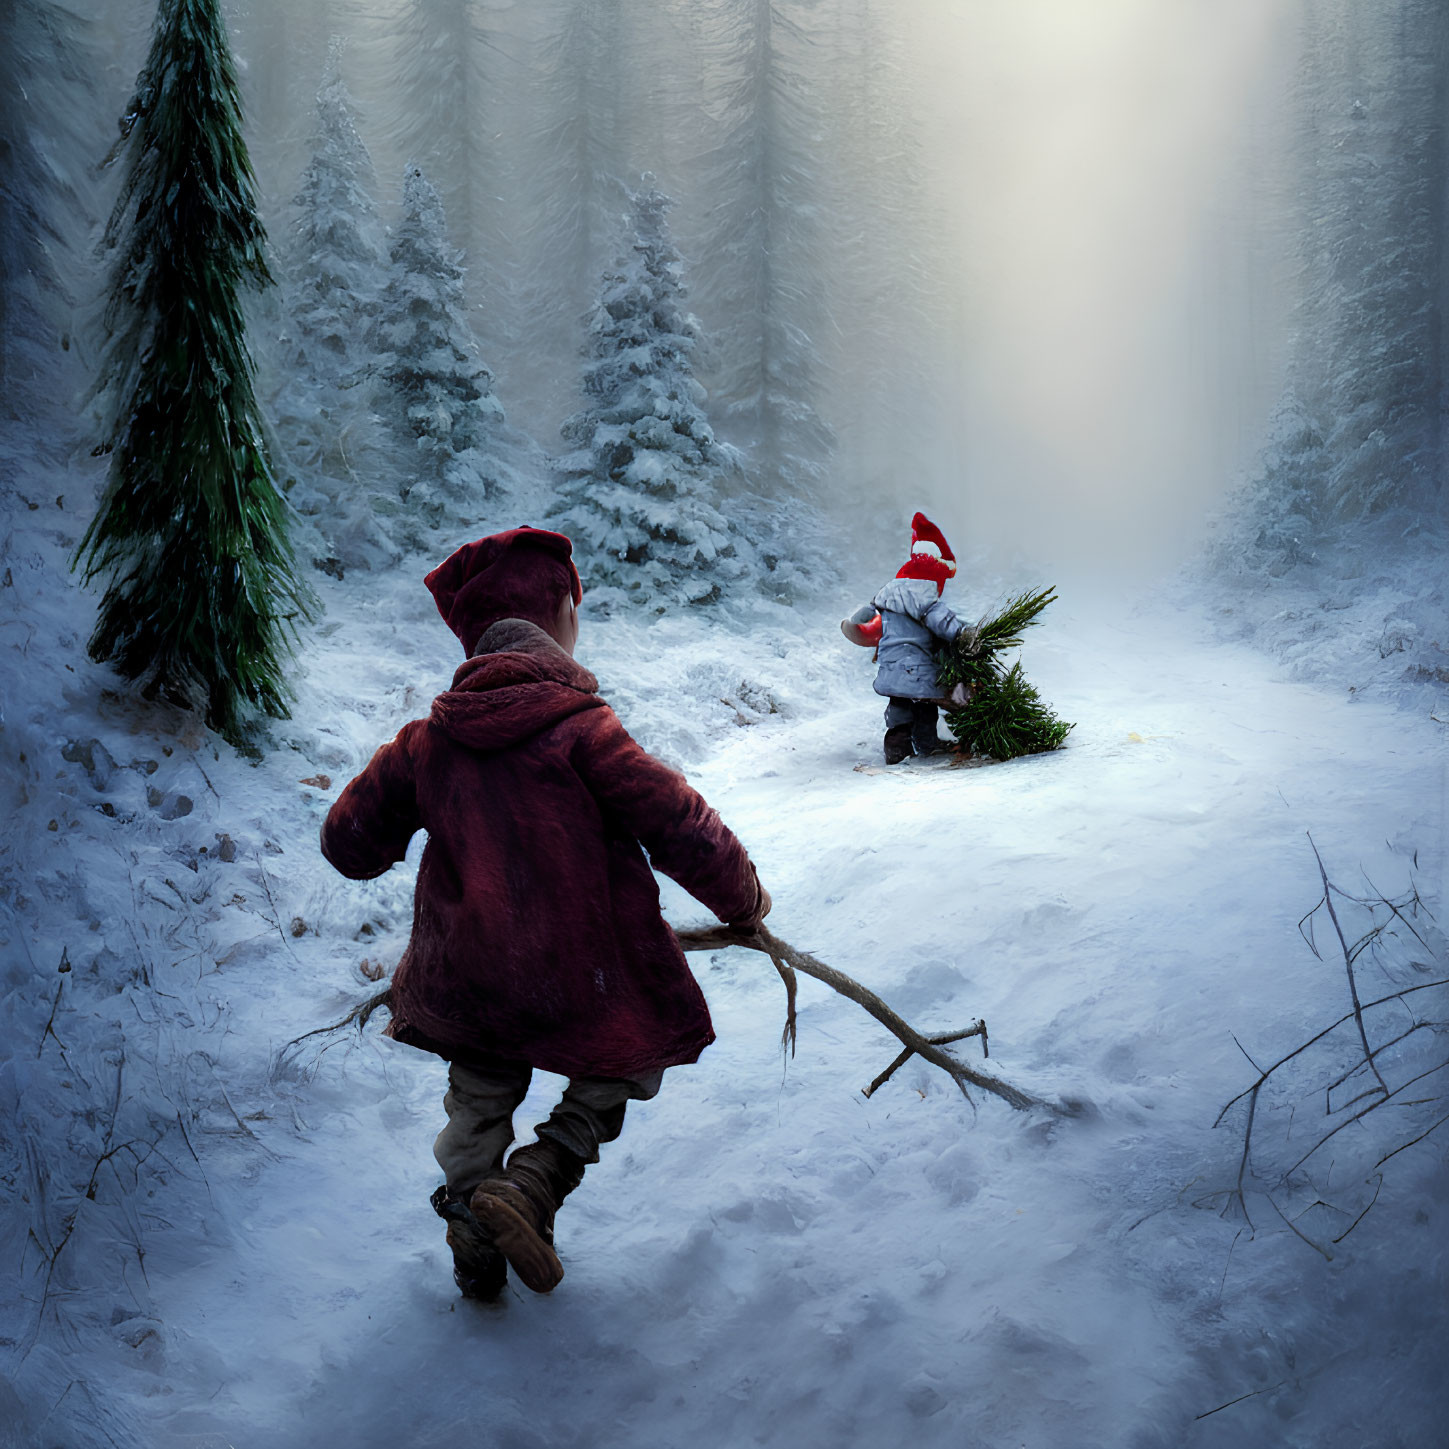 Child in red coat running towards small figure with Santa hat in snowy forest